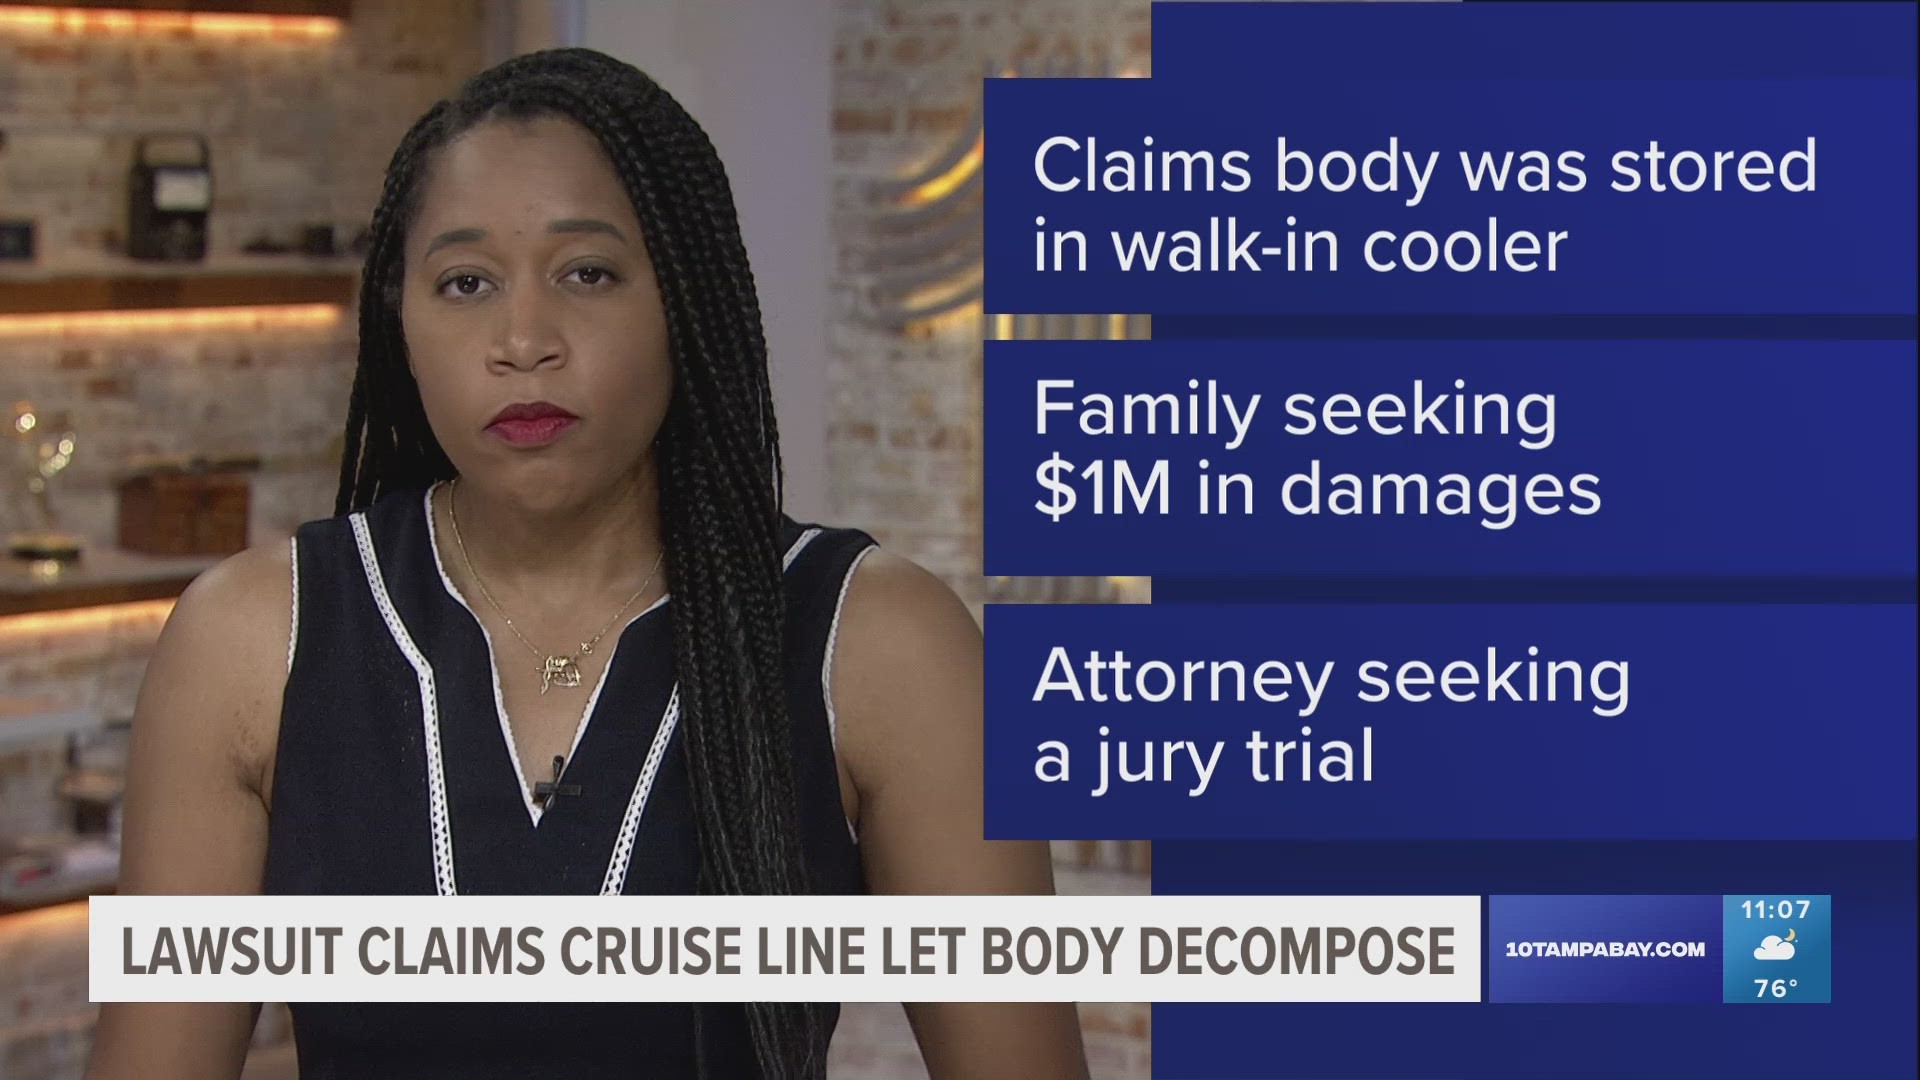 A widow is suing a cruise line, alleging that it let her husband's body decompose after he died of a heart attack.